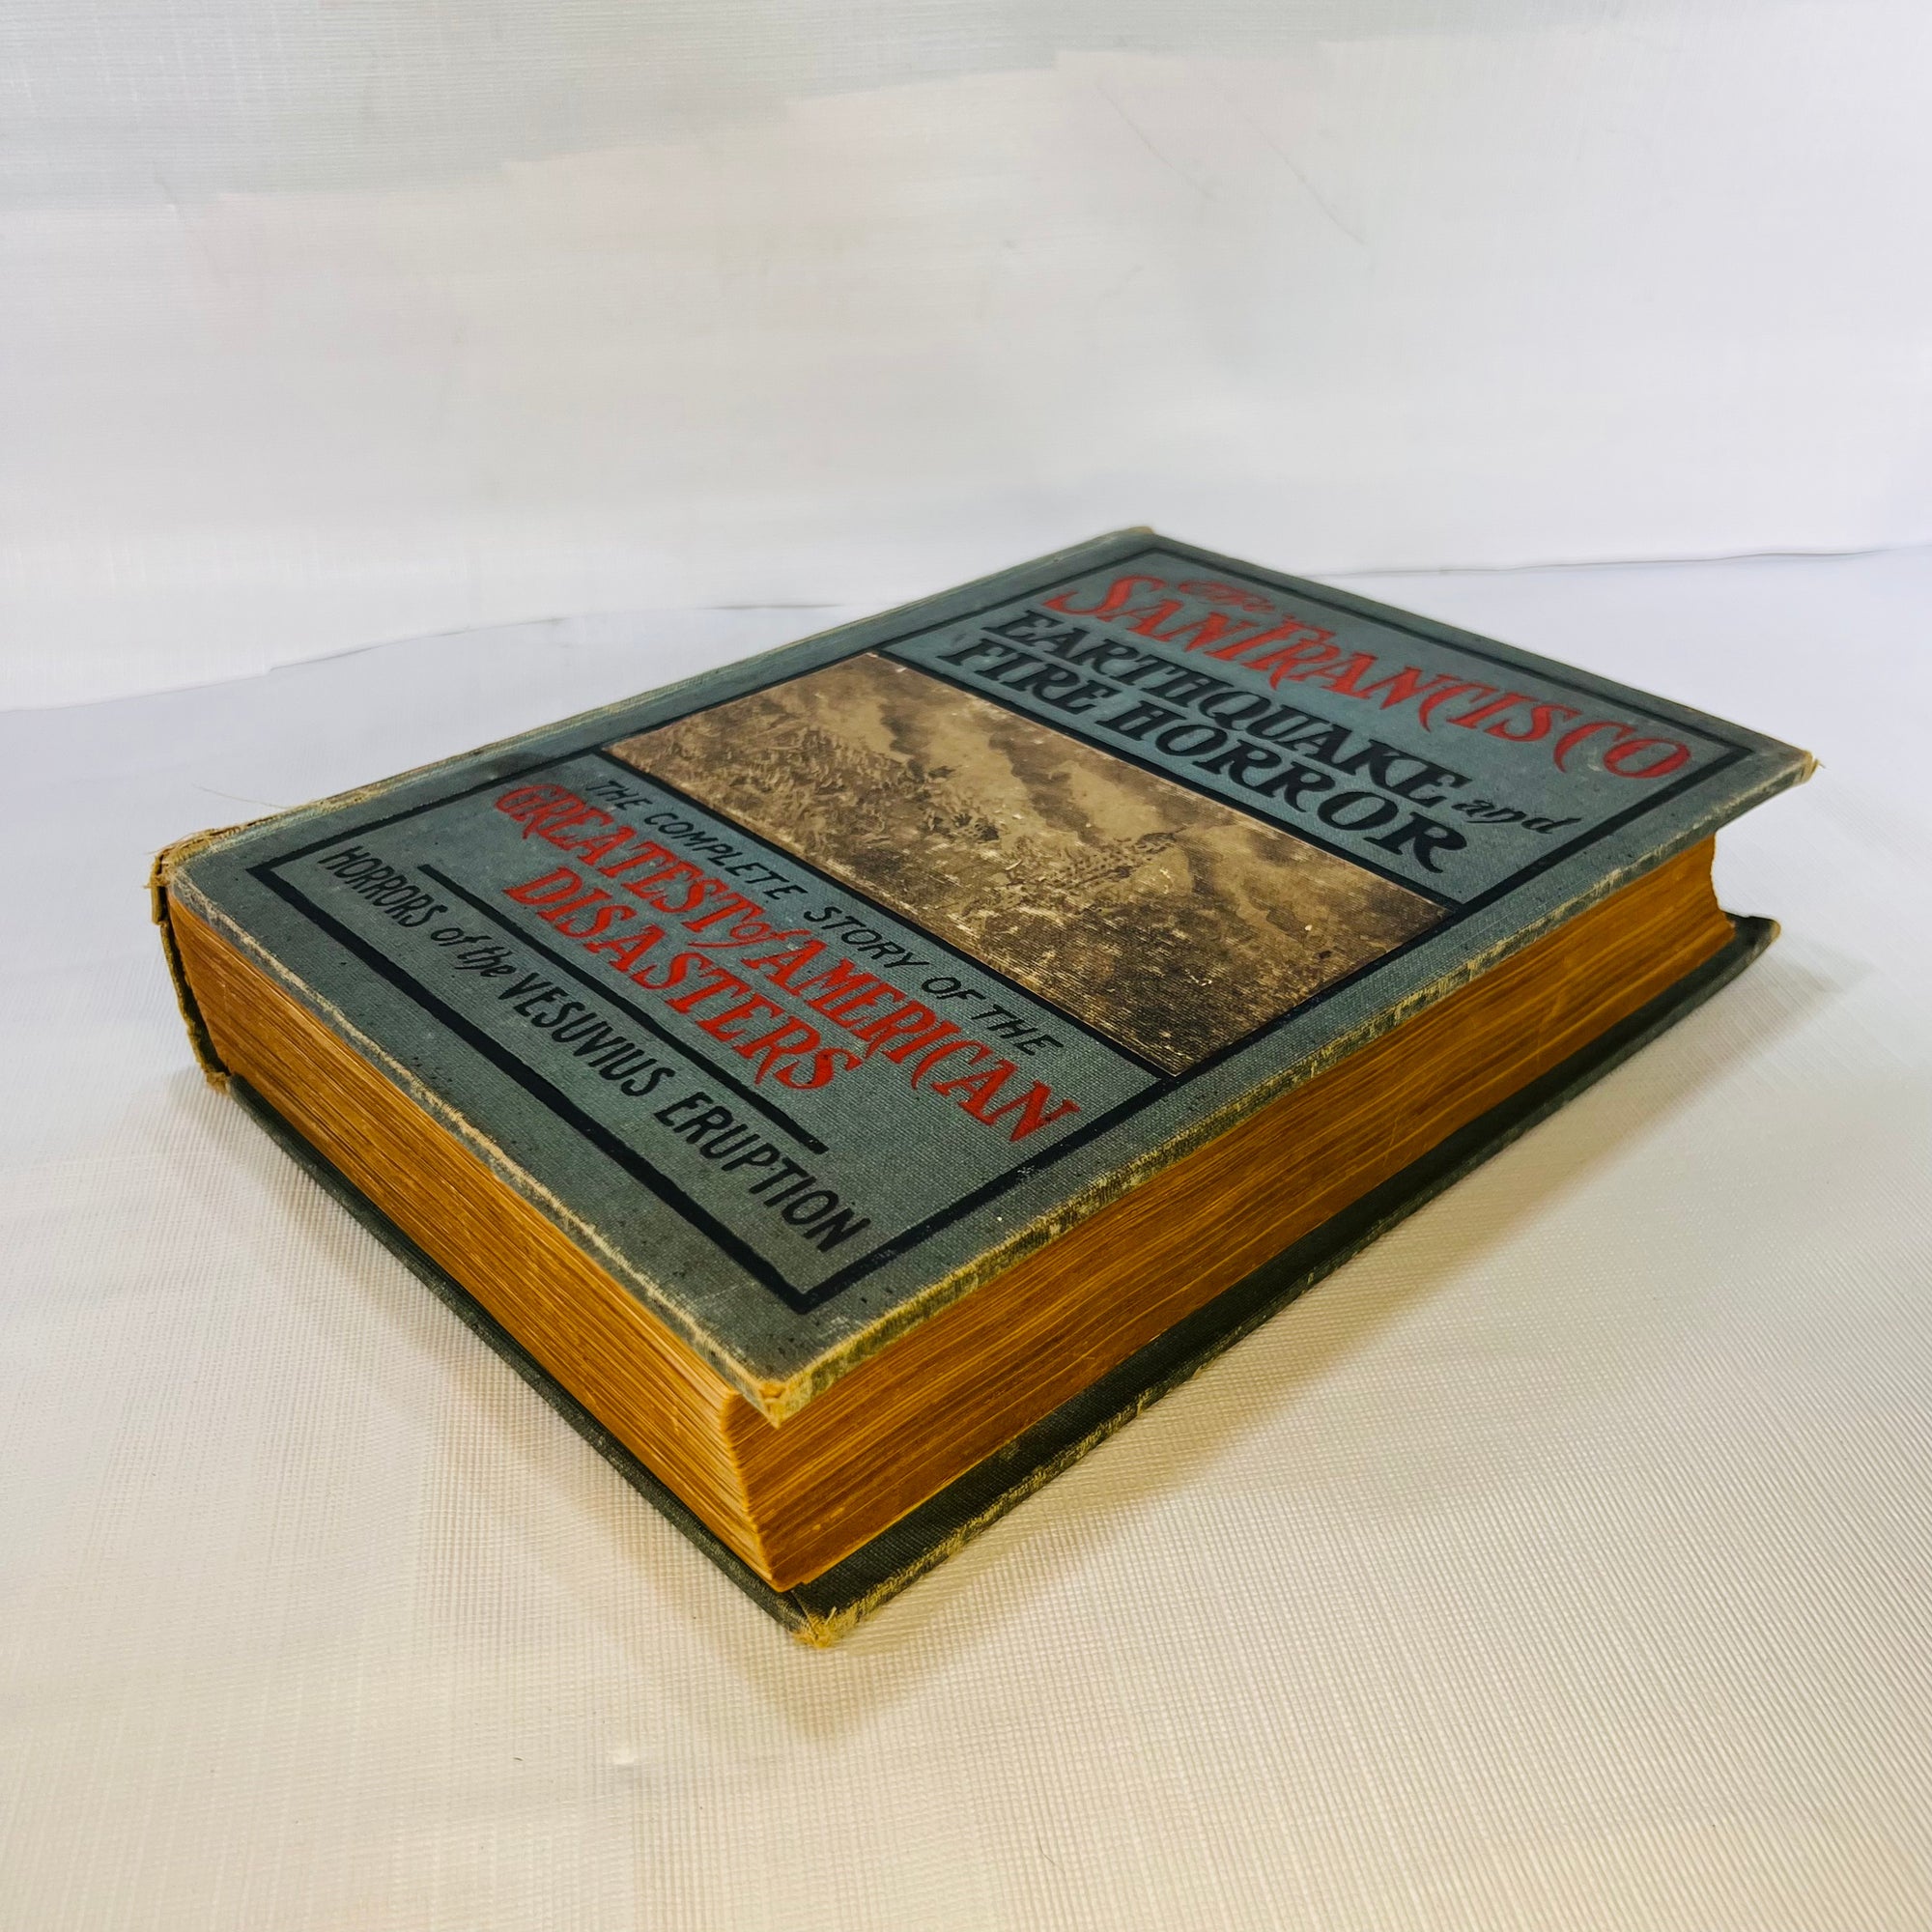 The History of the San Francisco Earthquake and Fire Horror the Complete Story by Charles Eugene Banks 1906